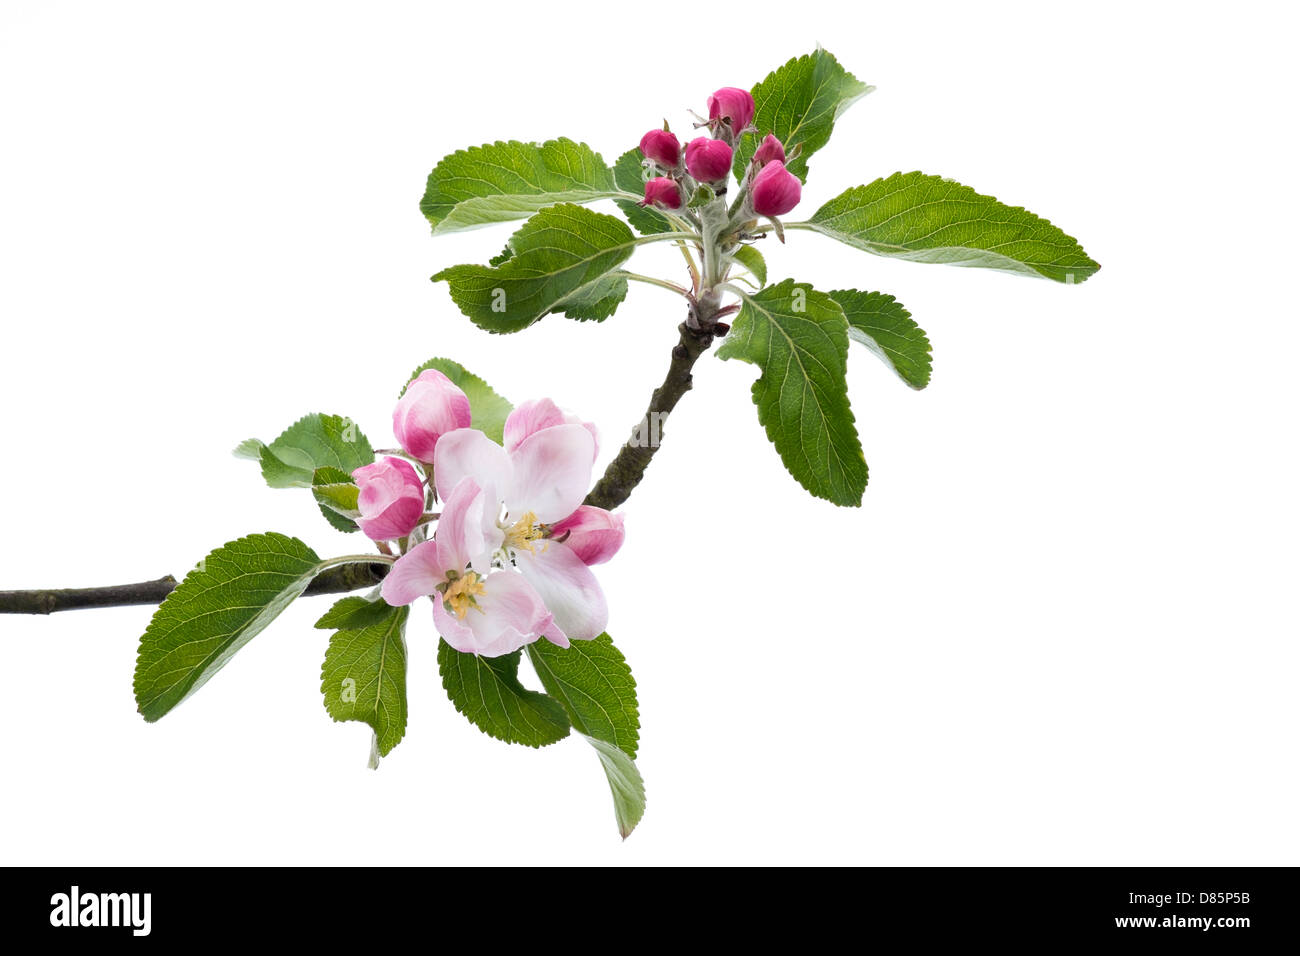 Close Up of Pink Apple Tree Blossom Flowers with Green Leaves on a White Background. Stock Photo